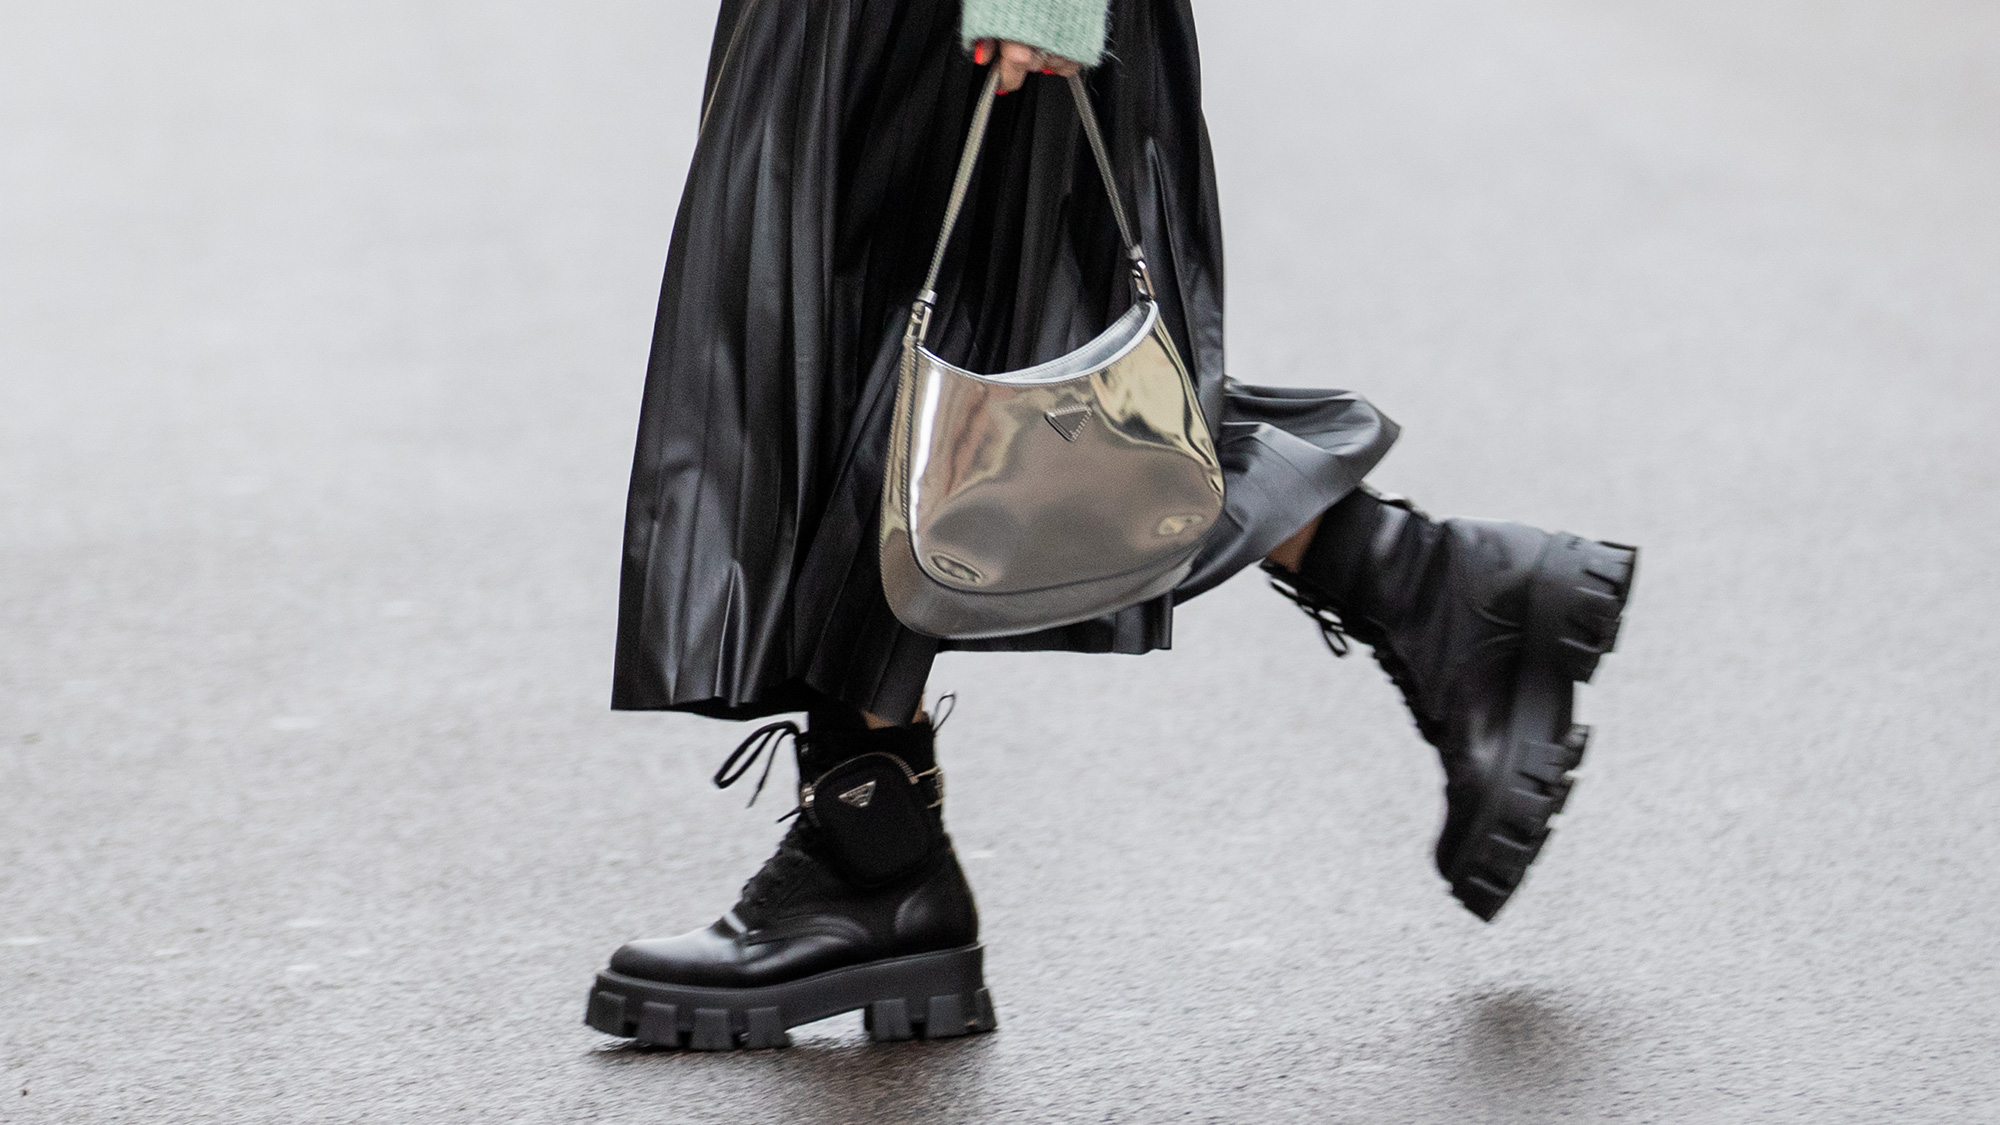 Walking boots are the one thing everyone’s buying right now